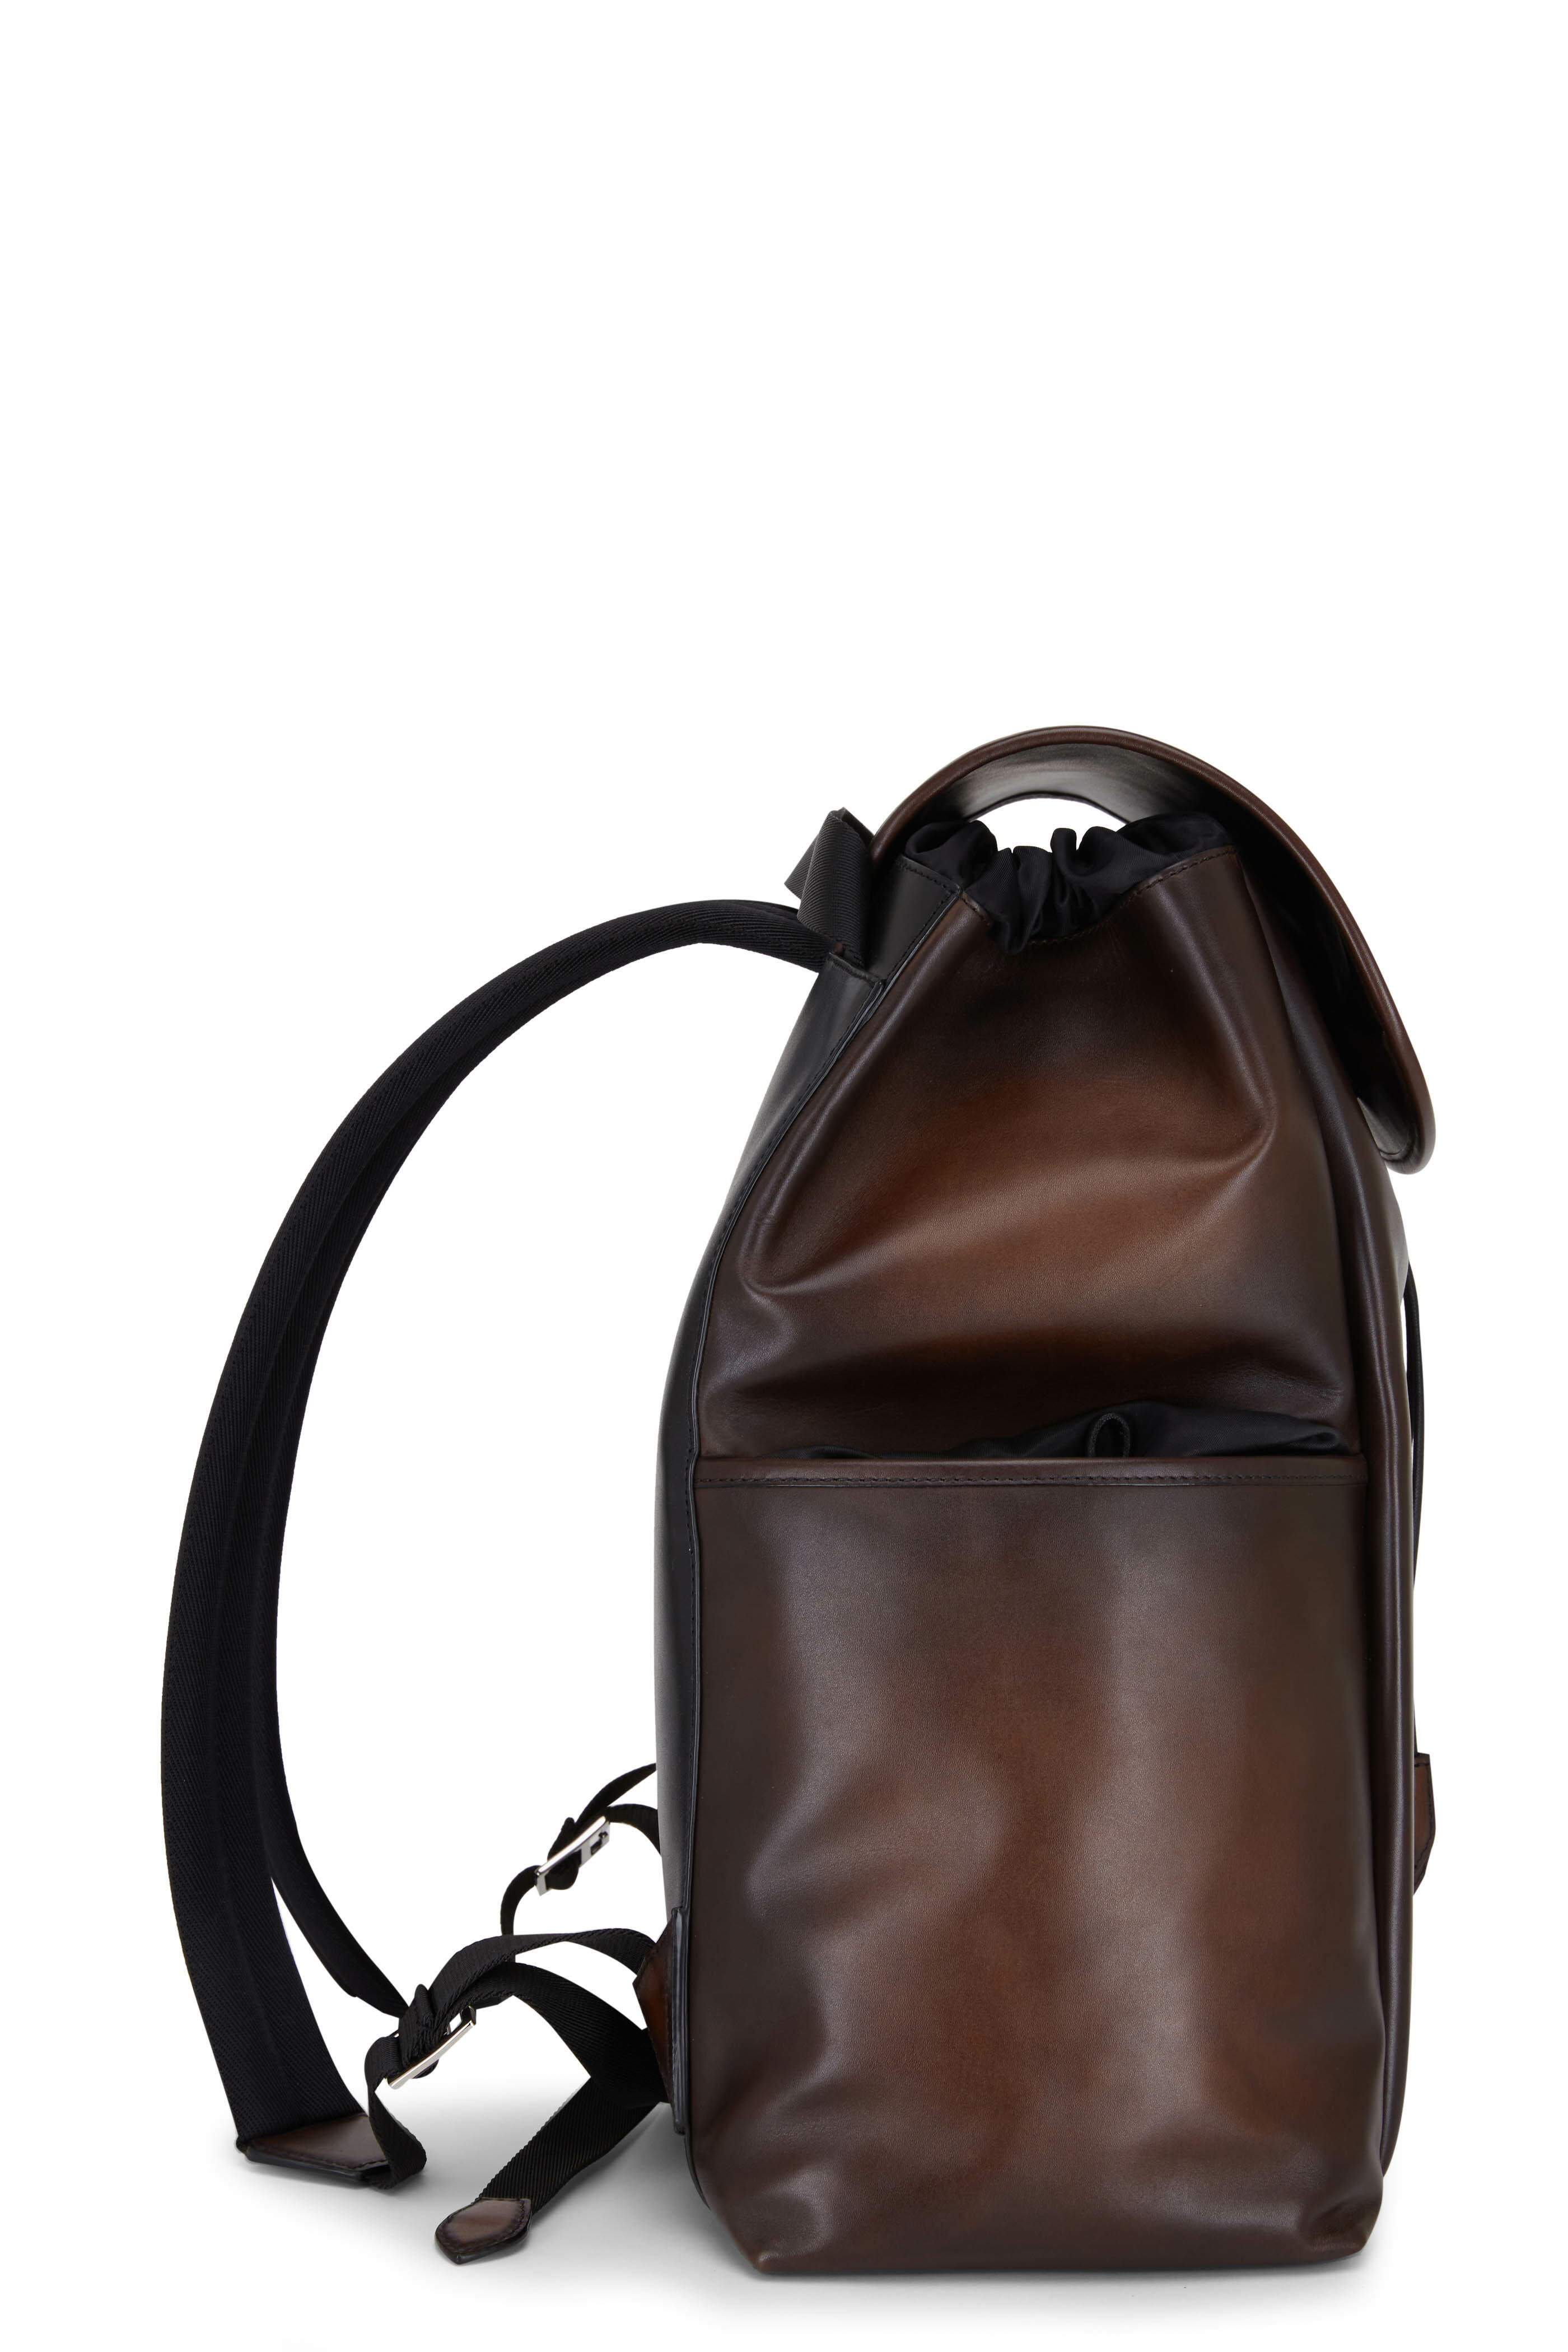 with time Perpetual Geology Berluti - Hiker M15 Scritto Leather Backpack | Mitchell Stores